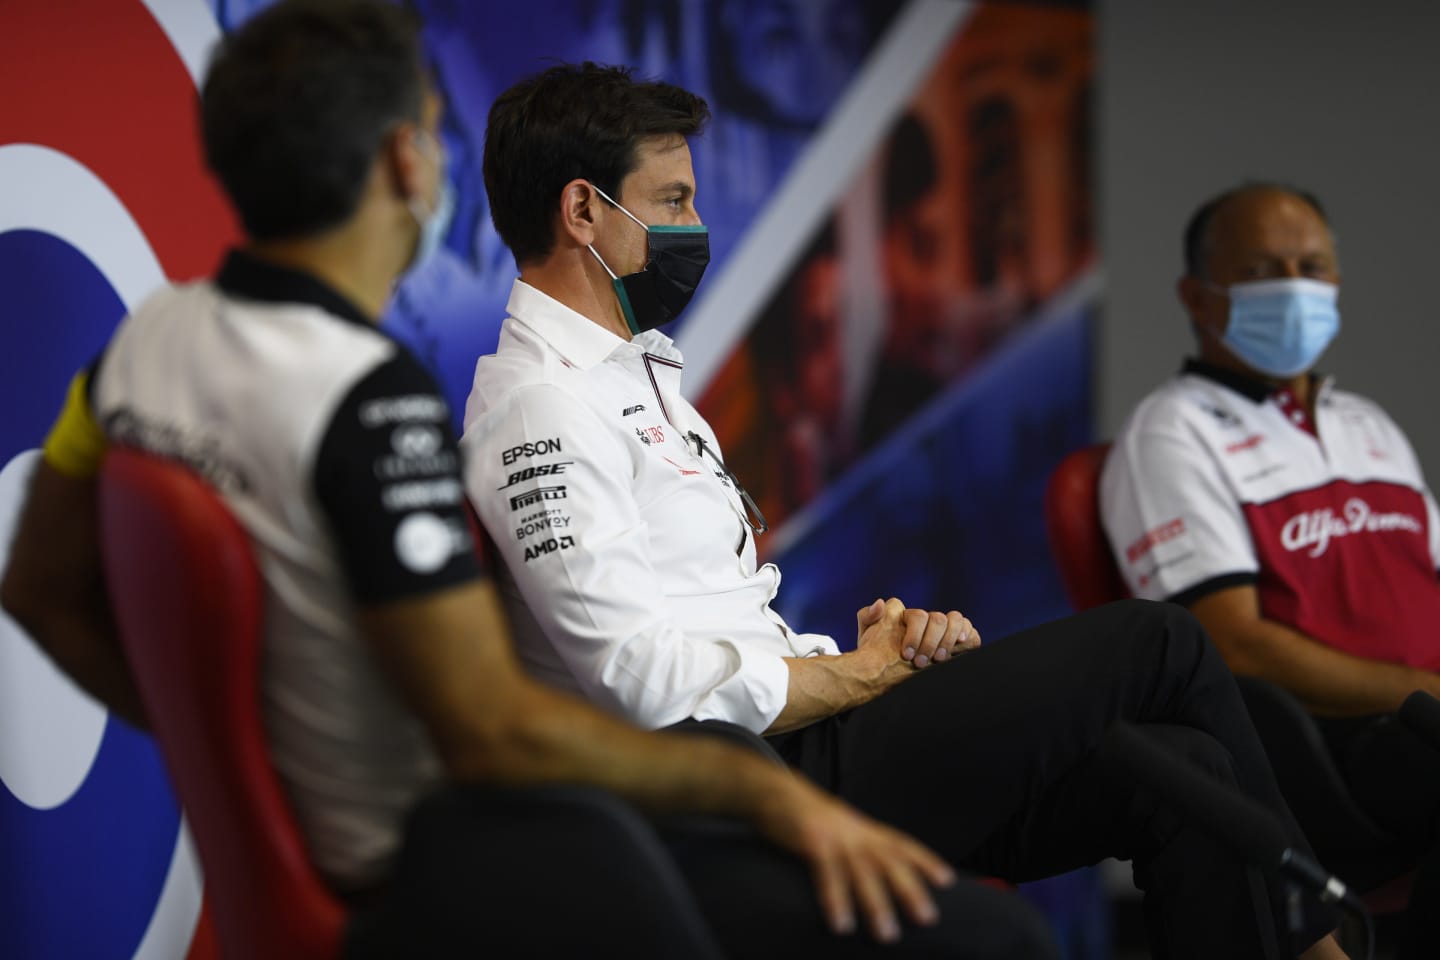 NORTHAMPTON, ENGLAND - AUGUST 07: Mercedes GP Executive Director Toto Wolff talks in the Team